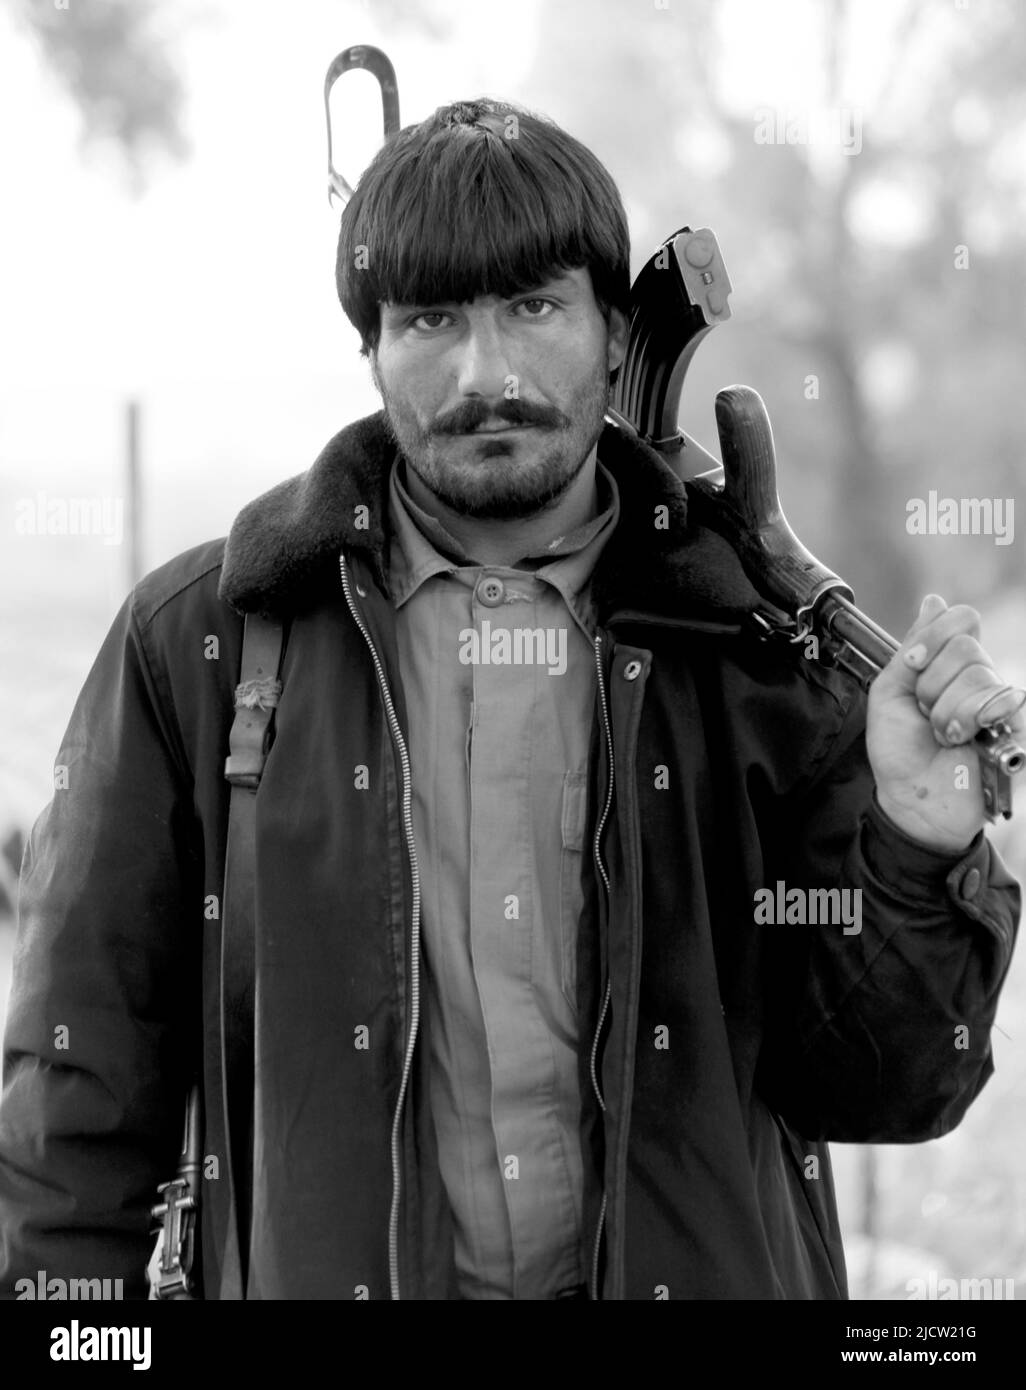 A local Afghan Uniformed Policemen (AUP) poses for a photo outside of a compound in Kajaki, Afghanistan February 15, 2012. The AUP are being trained b Stock Photo